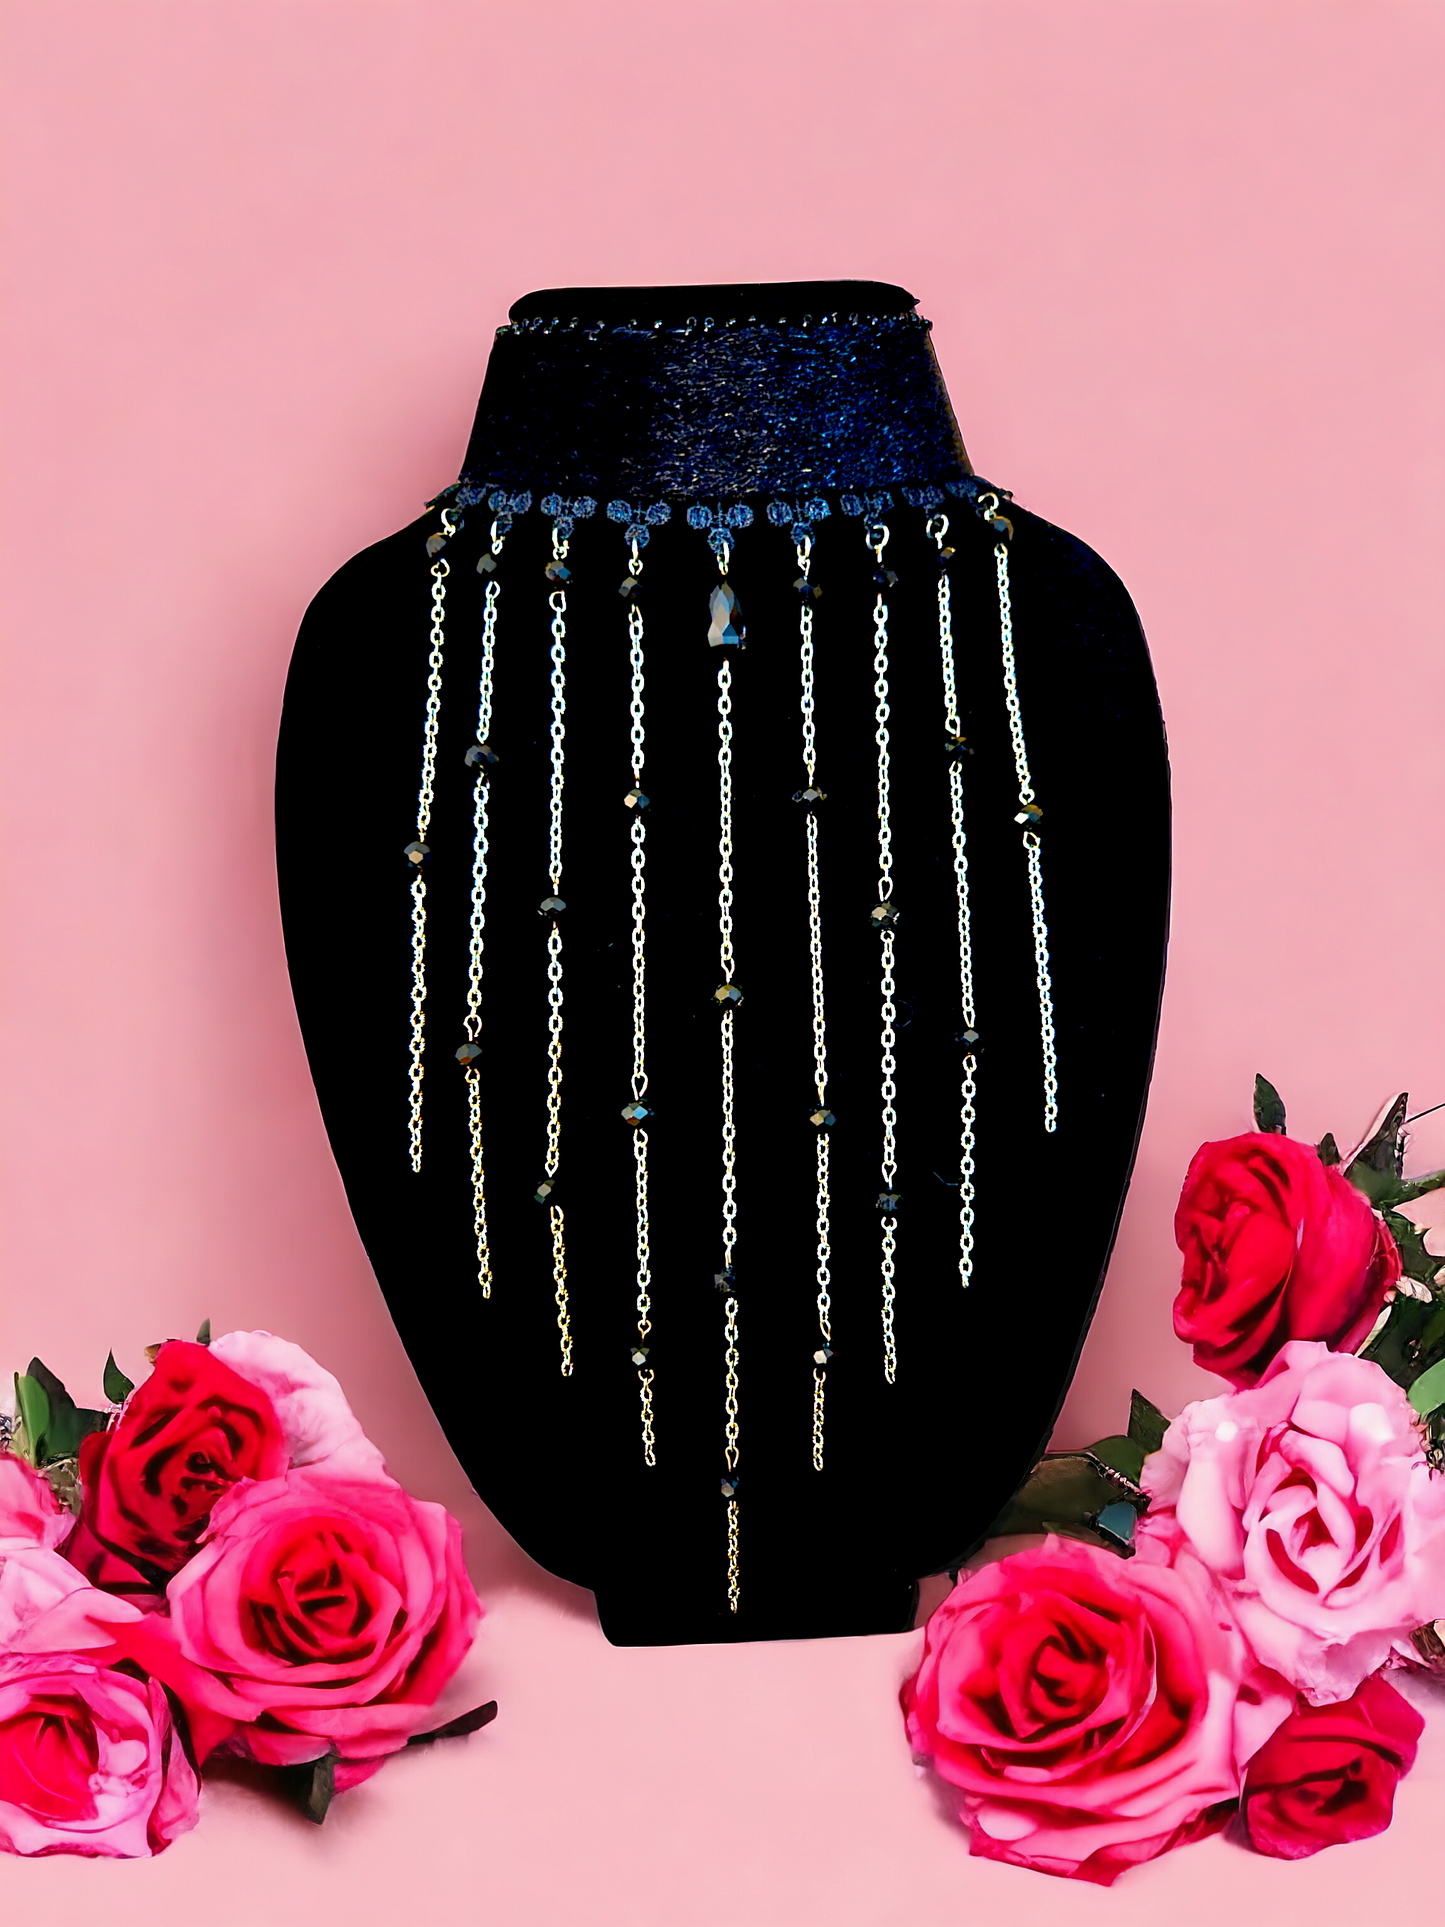 Double-sided color choker necklace